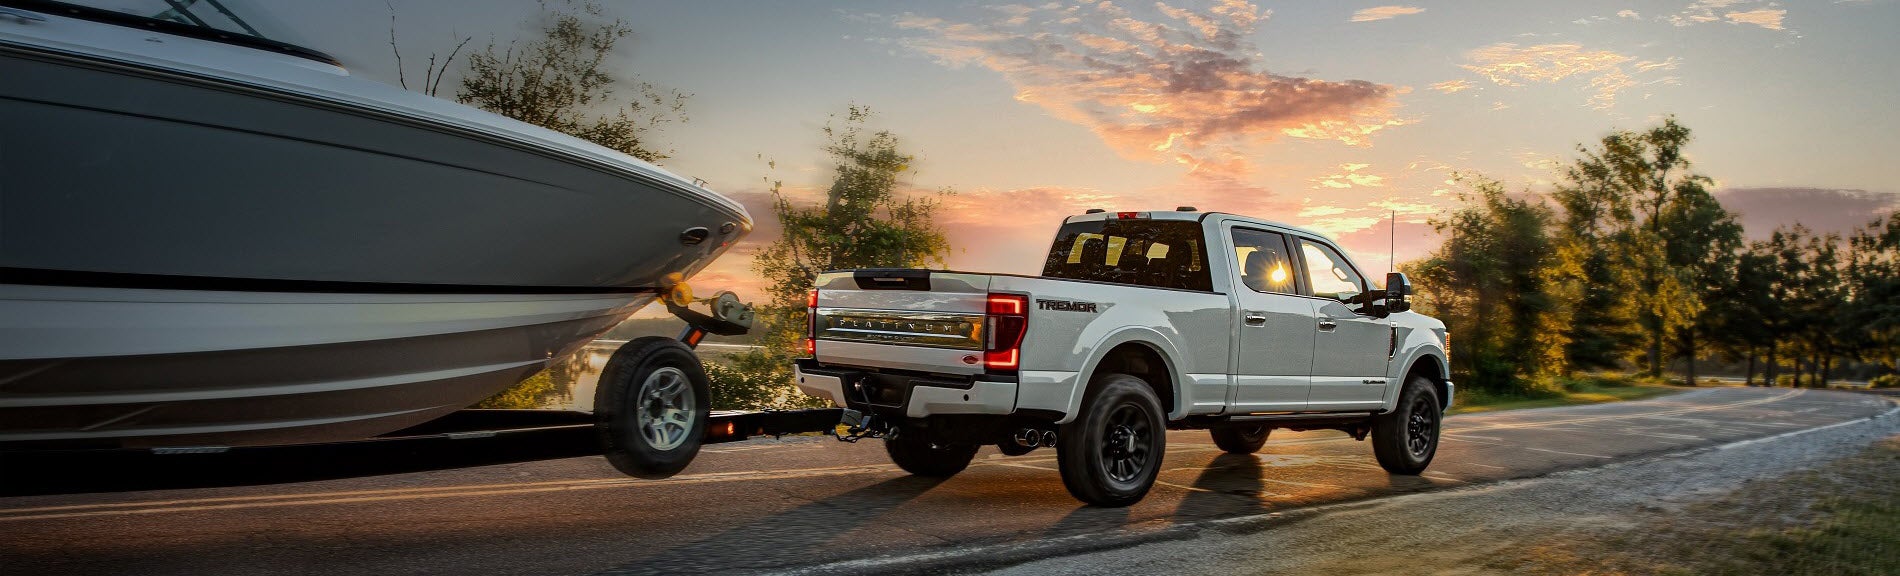 2022 Ford F-350 Towing Power